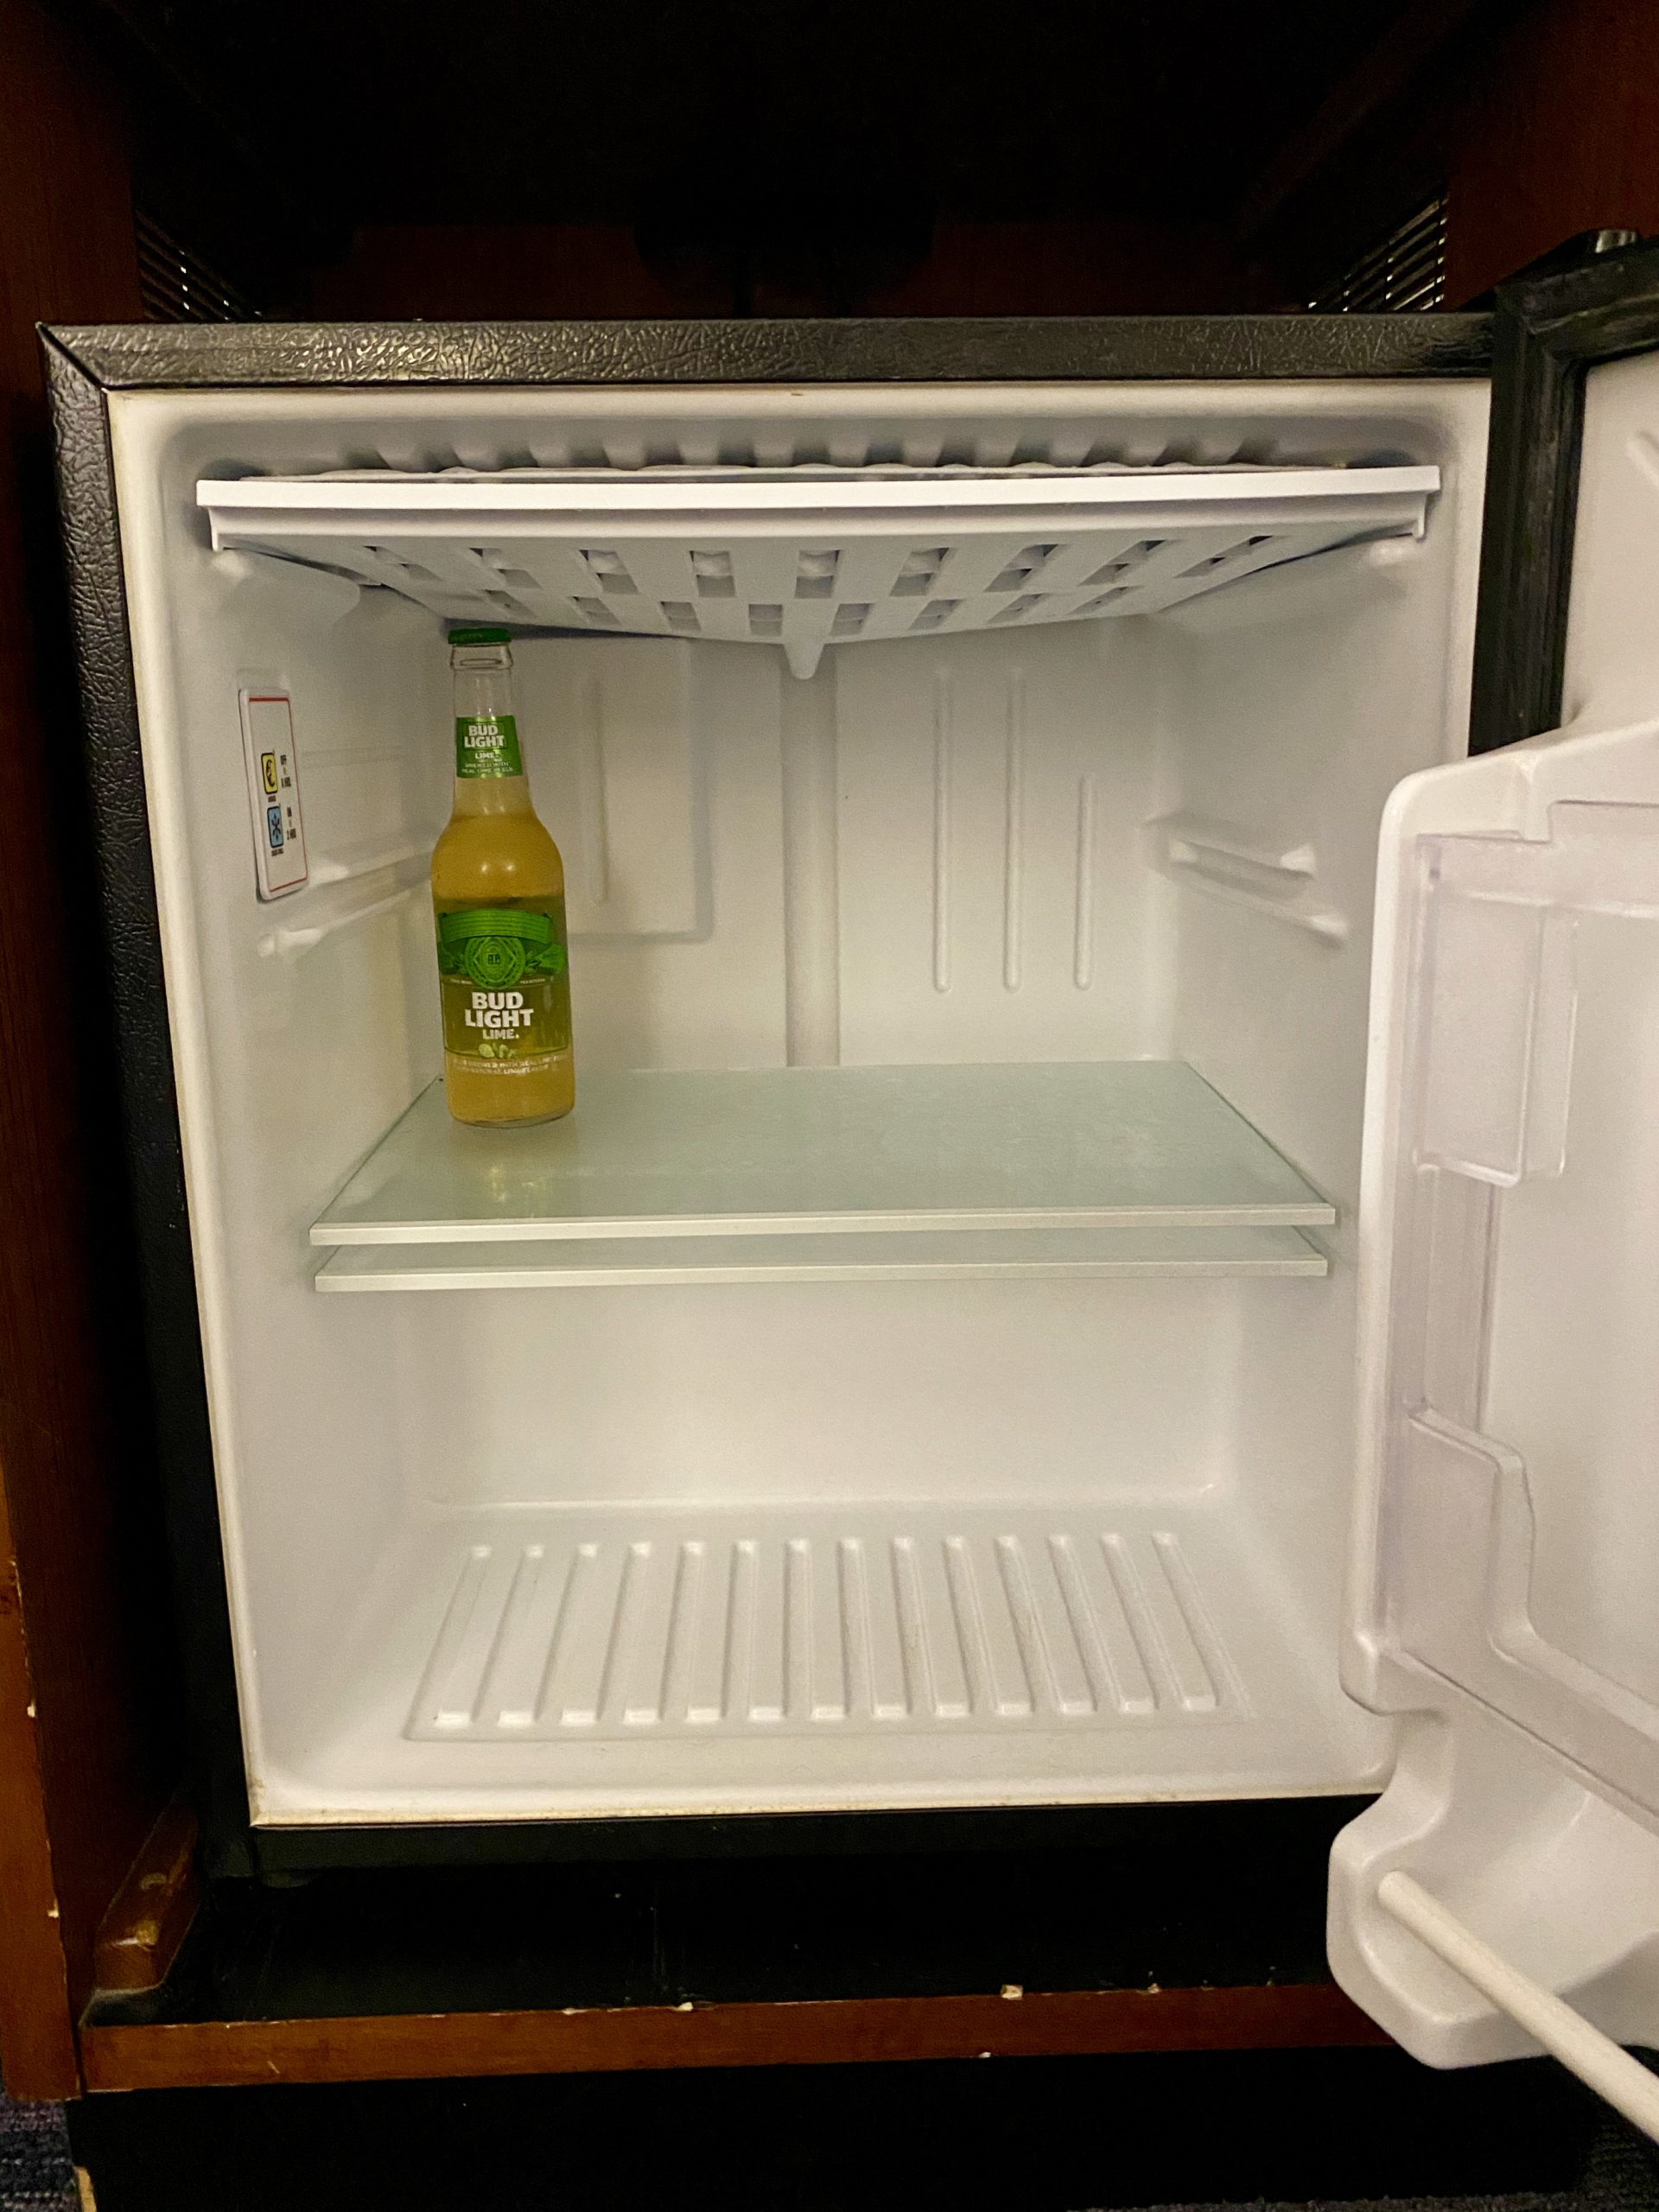 a small refrigerator with a bottle of beer inside